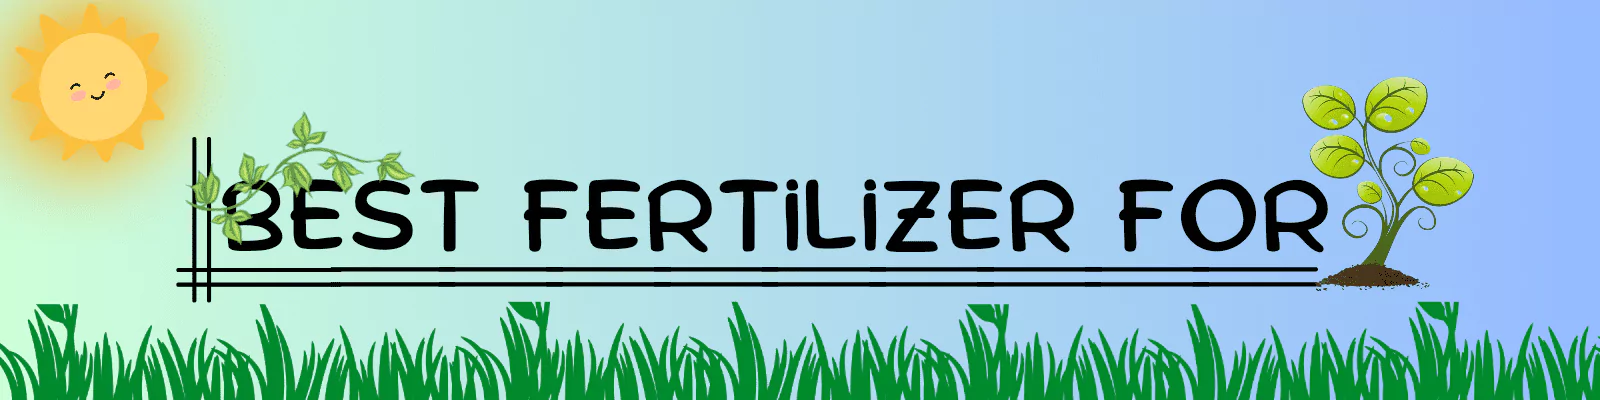 Best Fertilizer For - By Pure Greeny